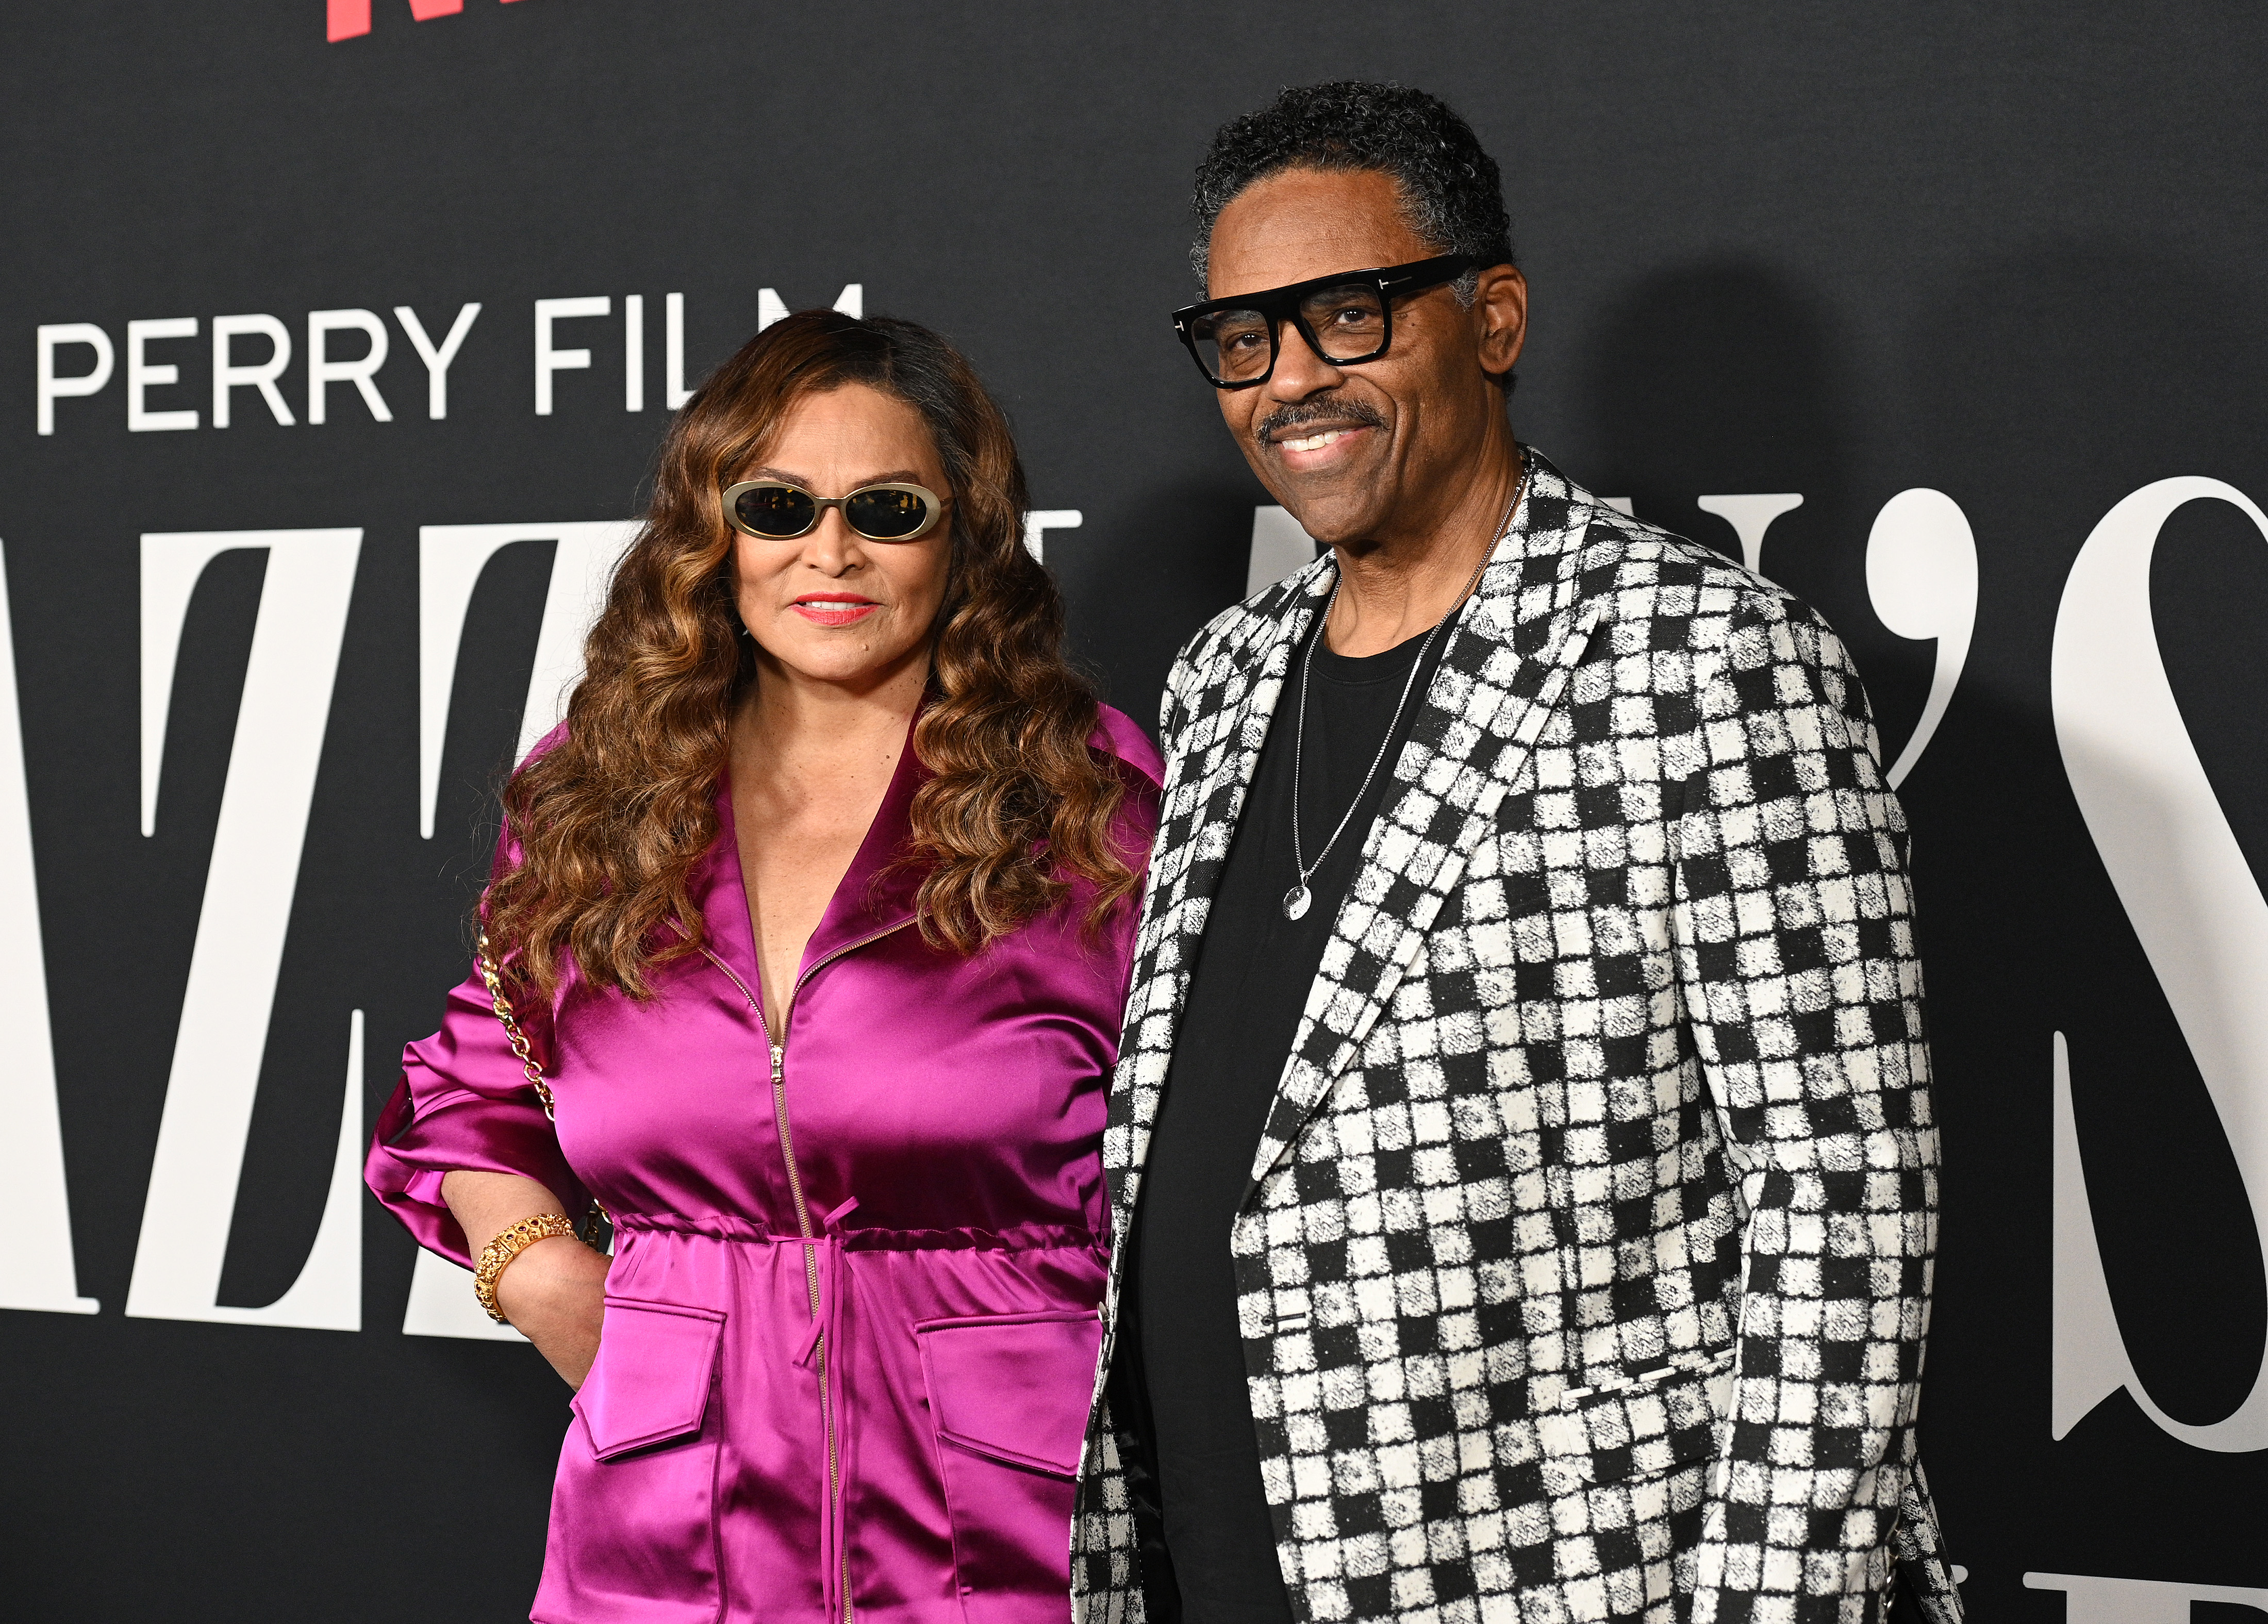 Tina Knowles-Lawson and Richard Lawson at the "A Jazzman's Blues" premiere held at Tudum Theater, on September 16, 2022, in Los Angeles, California. | Source: Getty Images